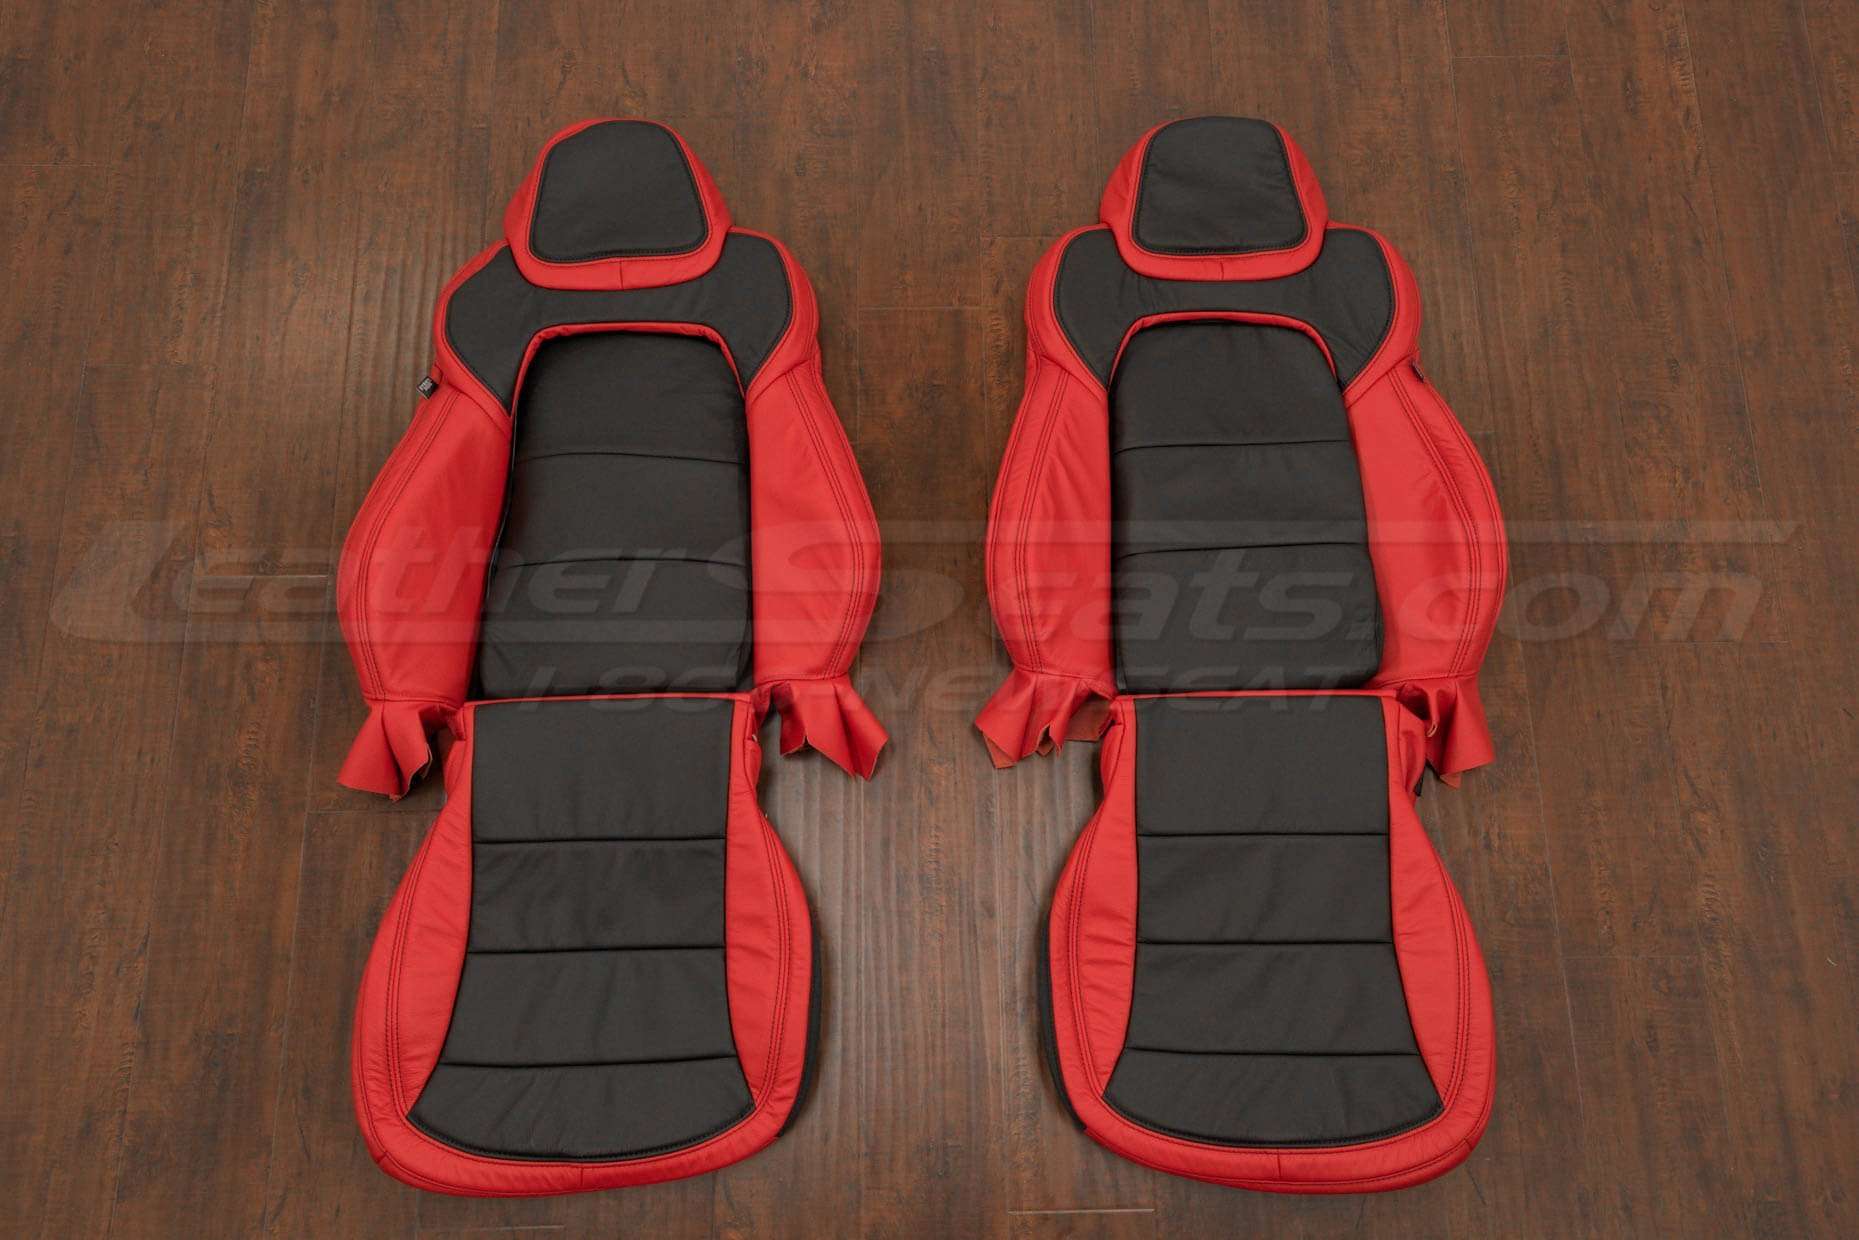 C6 Chevy Corvette Leather Seats - Bright Red & Black - Front seat upholstery